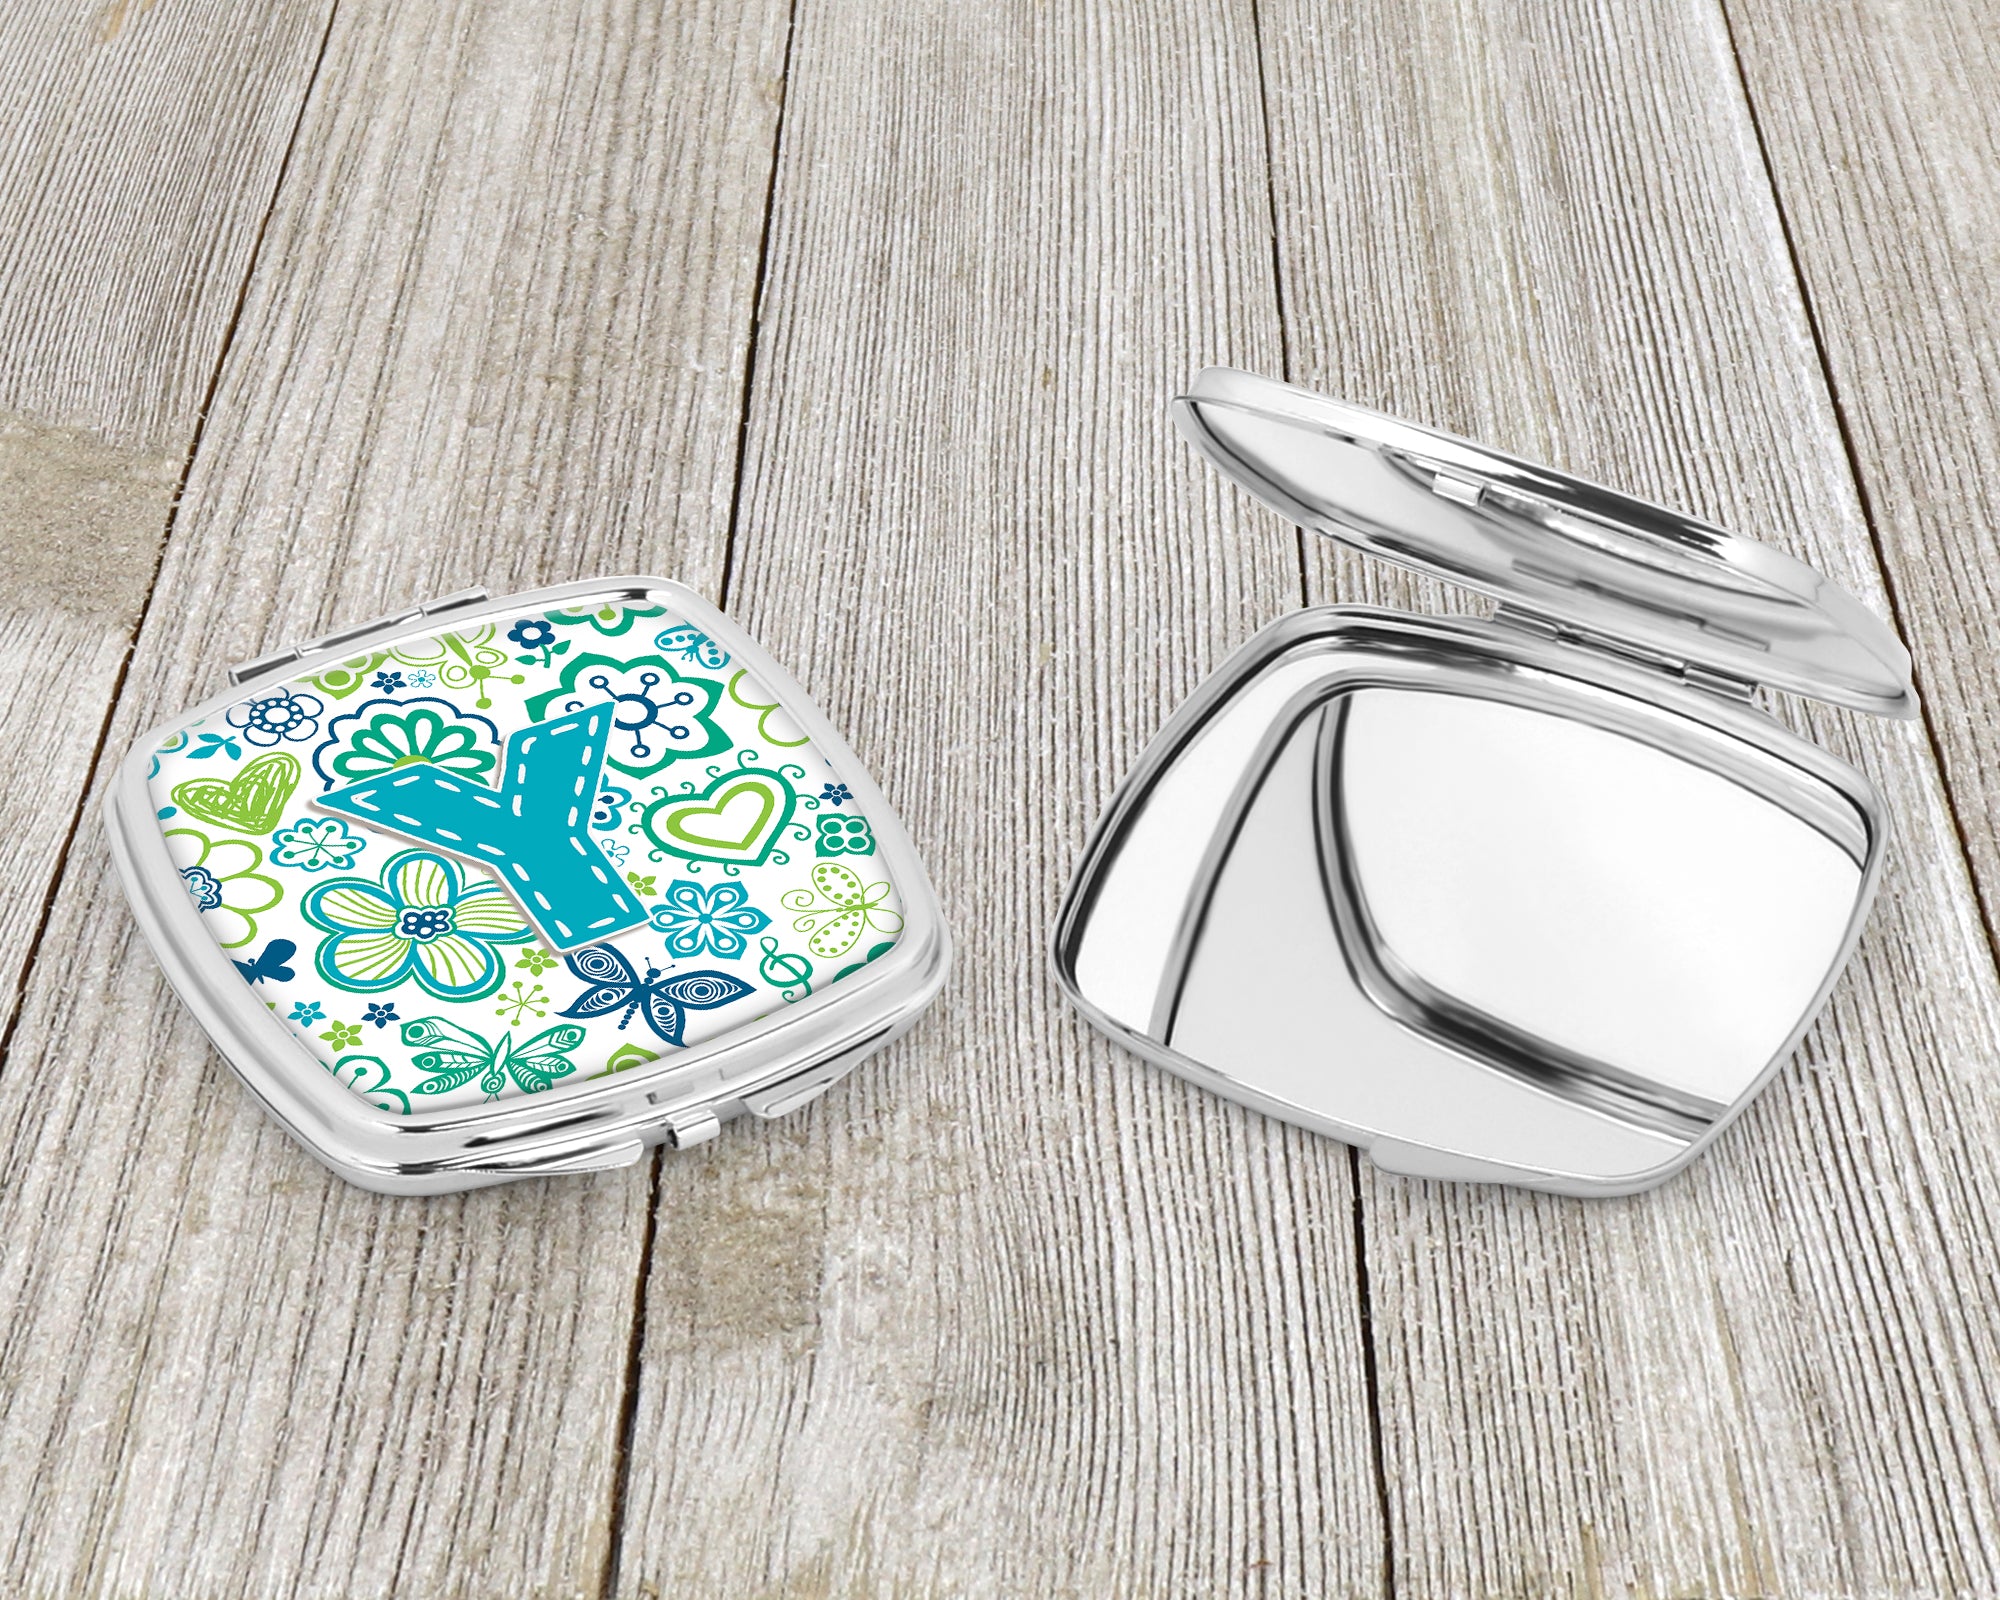 Letter Y Flowers and Butterflies Teal Blue Compact Mirror CJ2006-YSCM